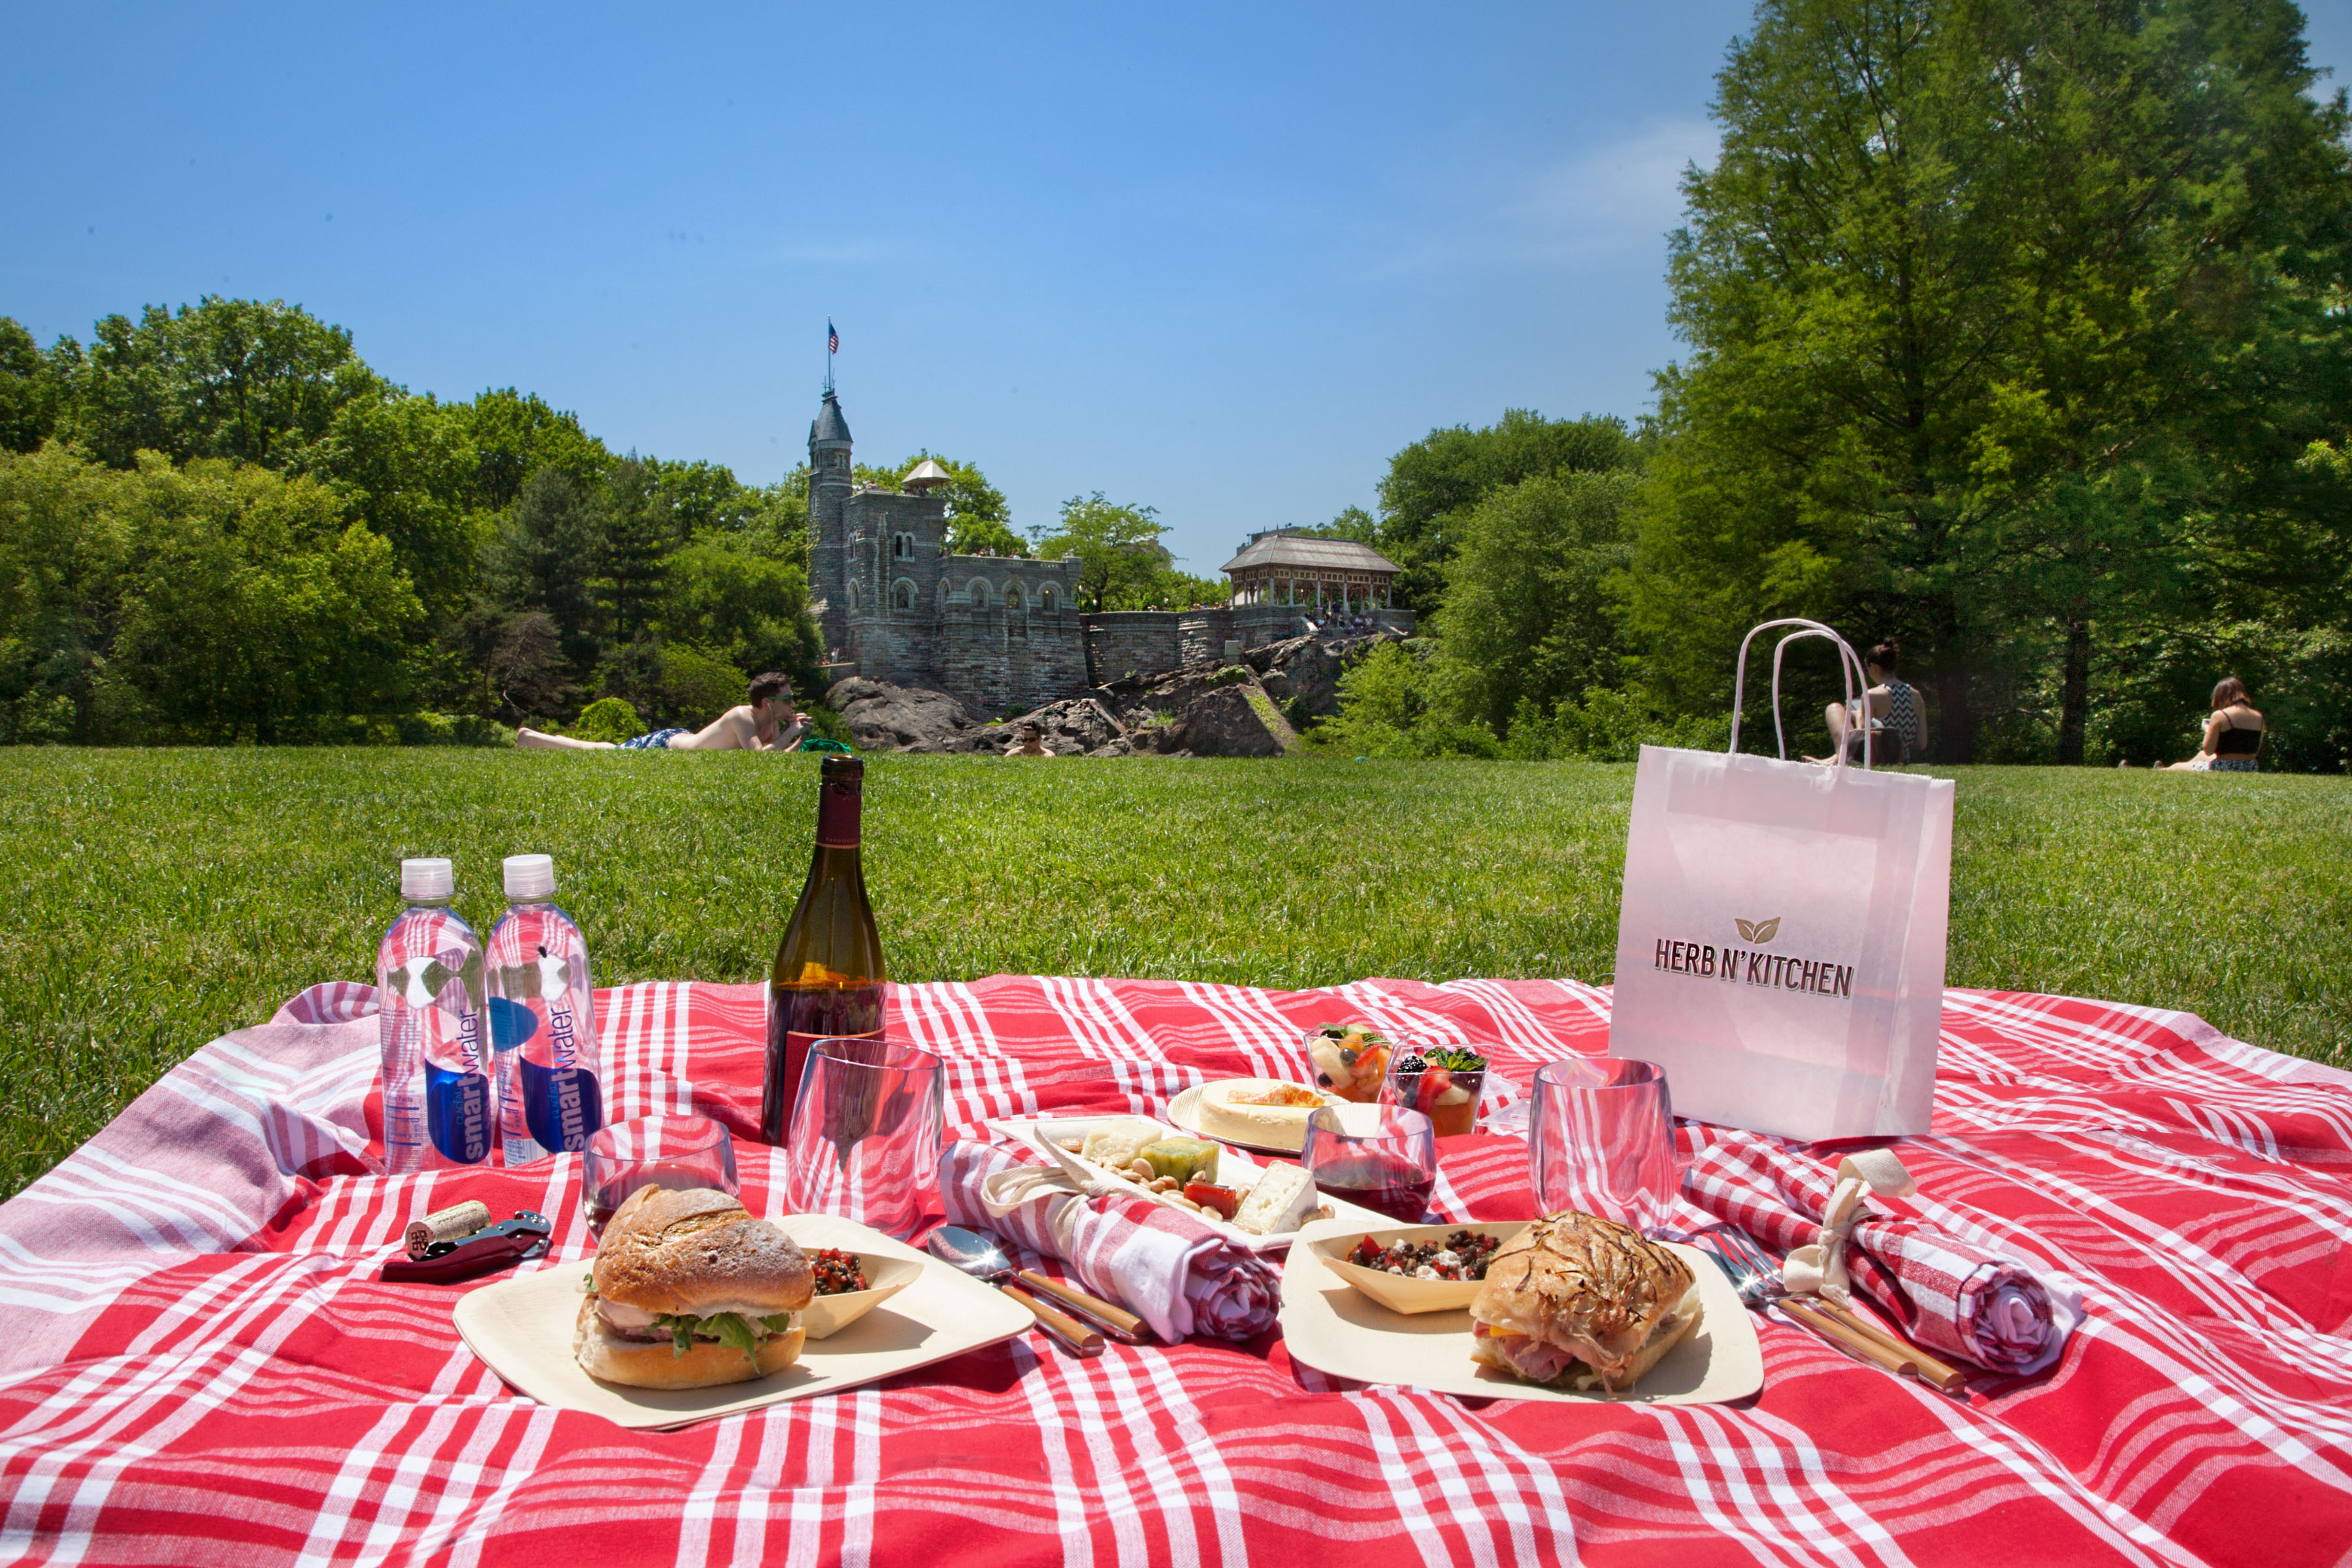 A-Tisket, A-Tasket, a Pre-Packed Picnic Basket | IN New York